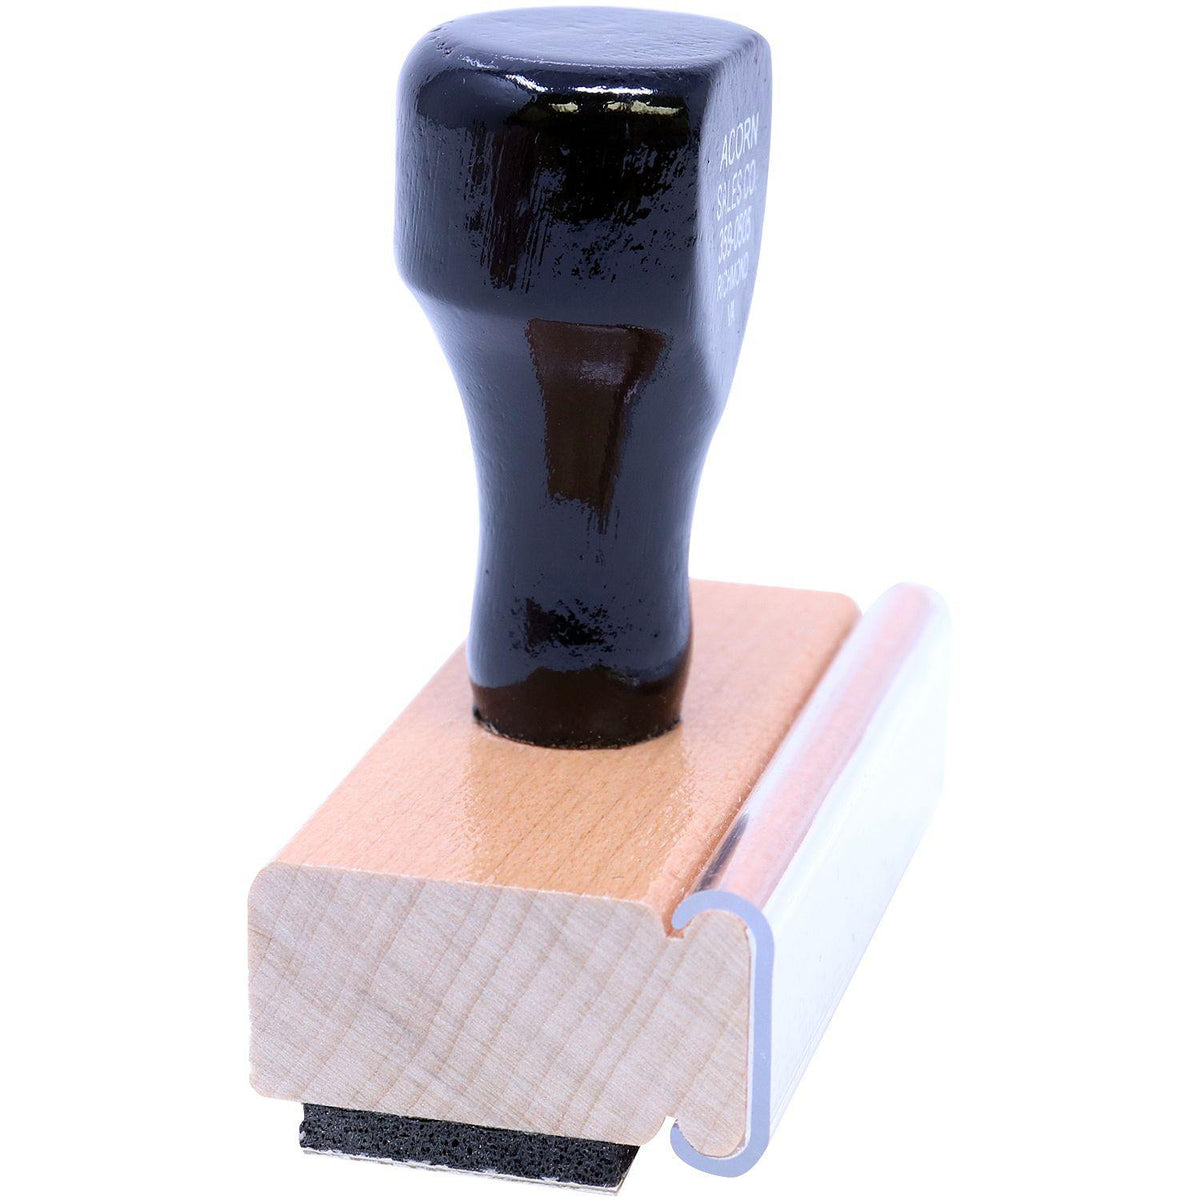 Side View of For Official Use Only Rubber Stamp at an Angle